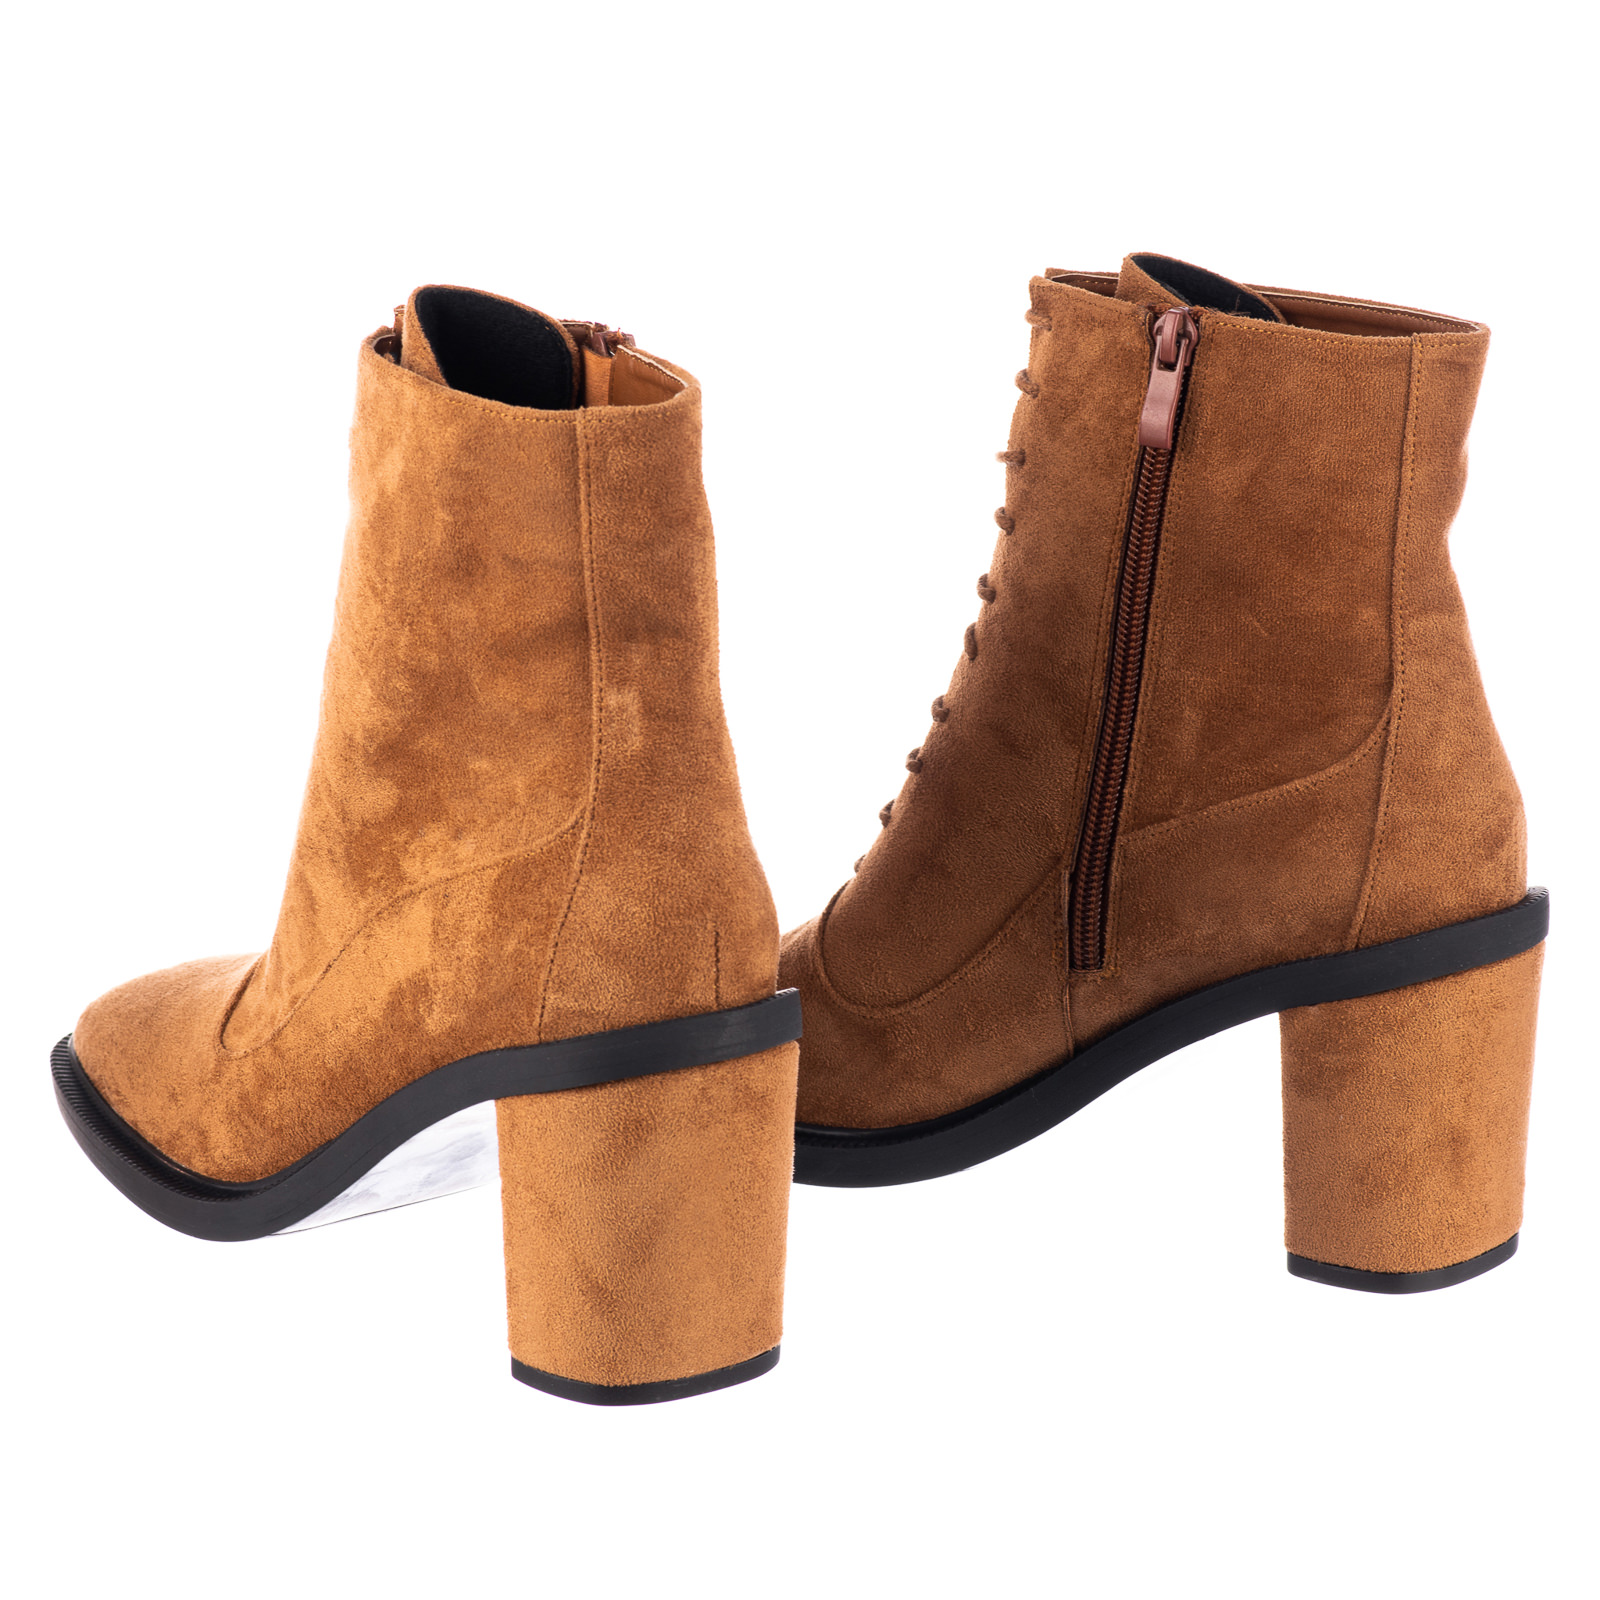 Women ankle boots B671 - CAMEL